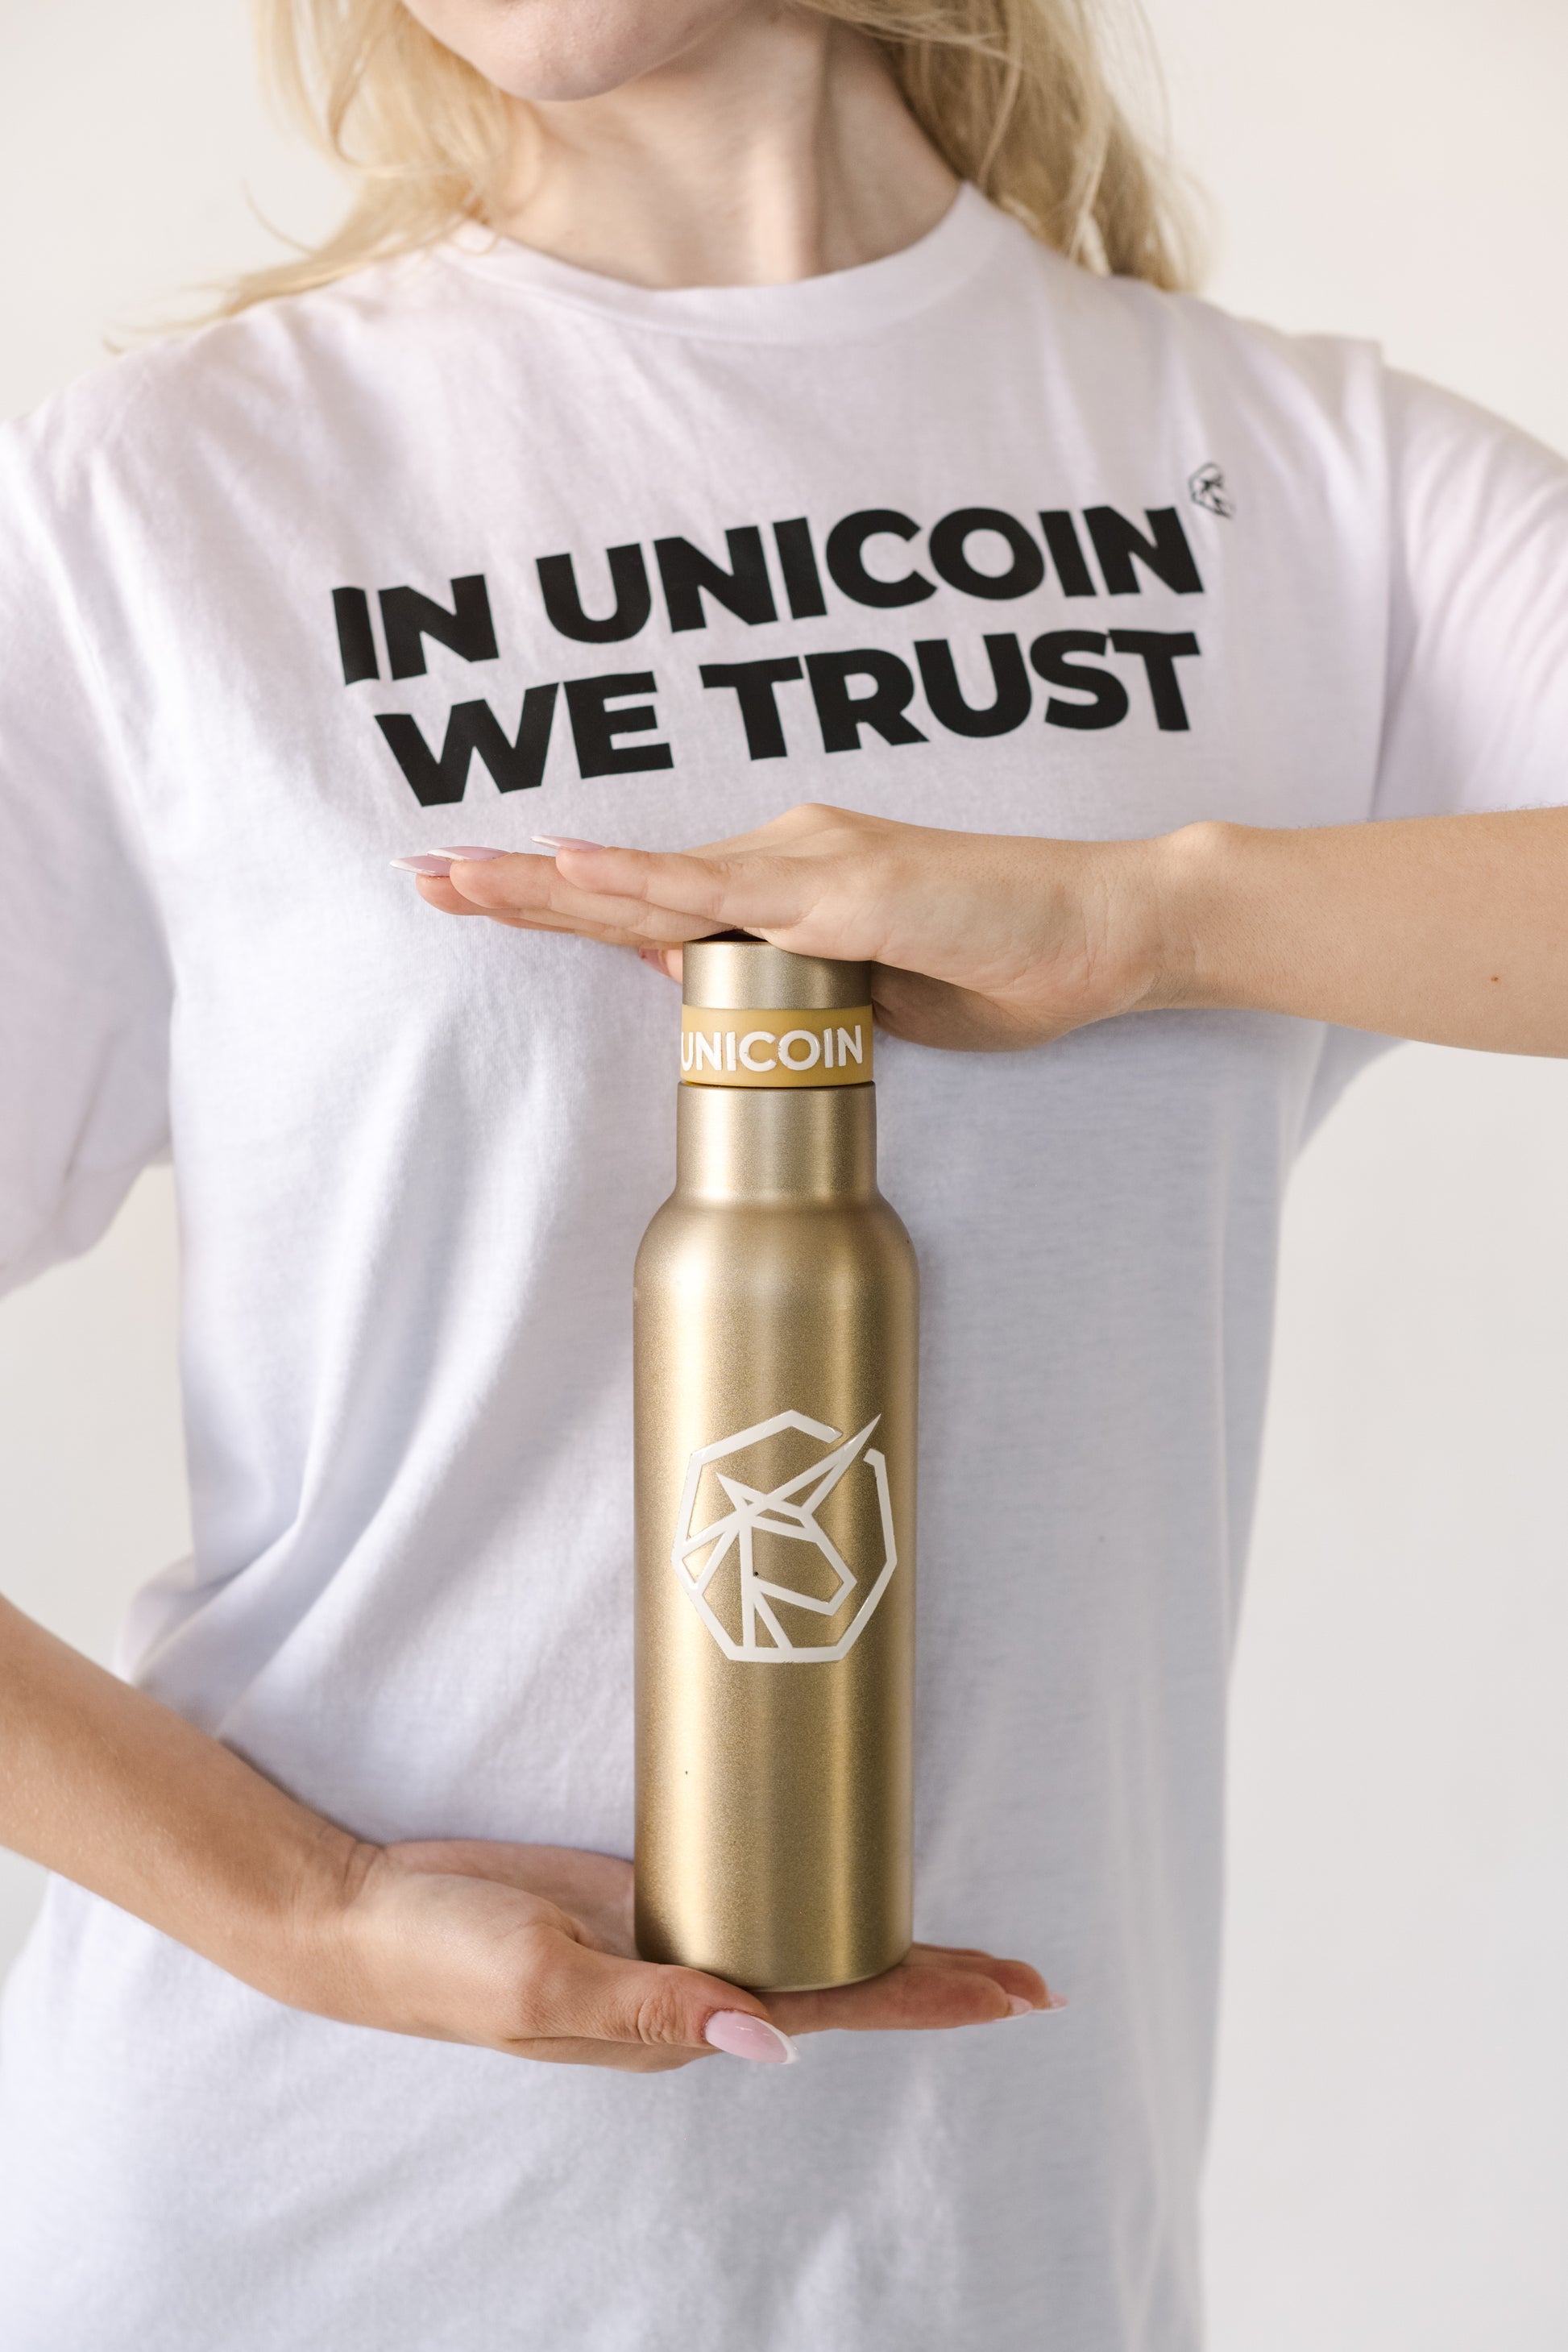 Experience ultimate thermal performance with our Unicoin Water Bottle Golden! Crafted from durable double-wall stainless steel, featuring innovative copper vacuum insulation tech, it keeps drinks hot for 12 hours, cold for 48. Screw cap with integrated handle for easy carrying. BPA-free for worry-free hydration on the go!